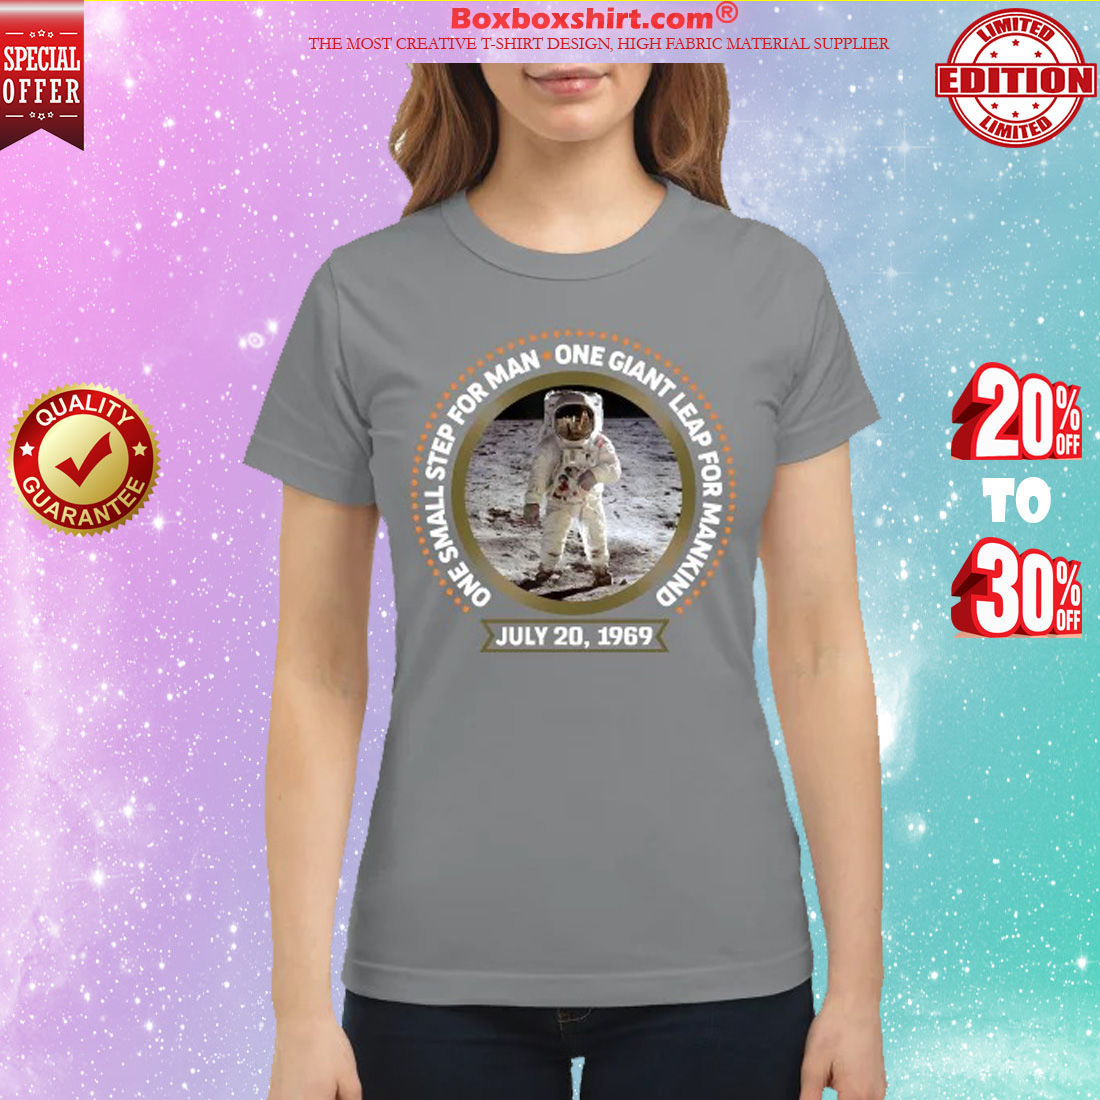 One small step for man one gaint leap for mankind classic shirt